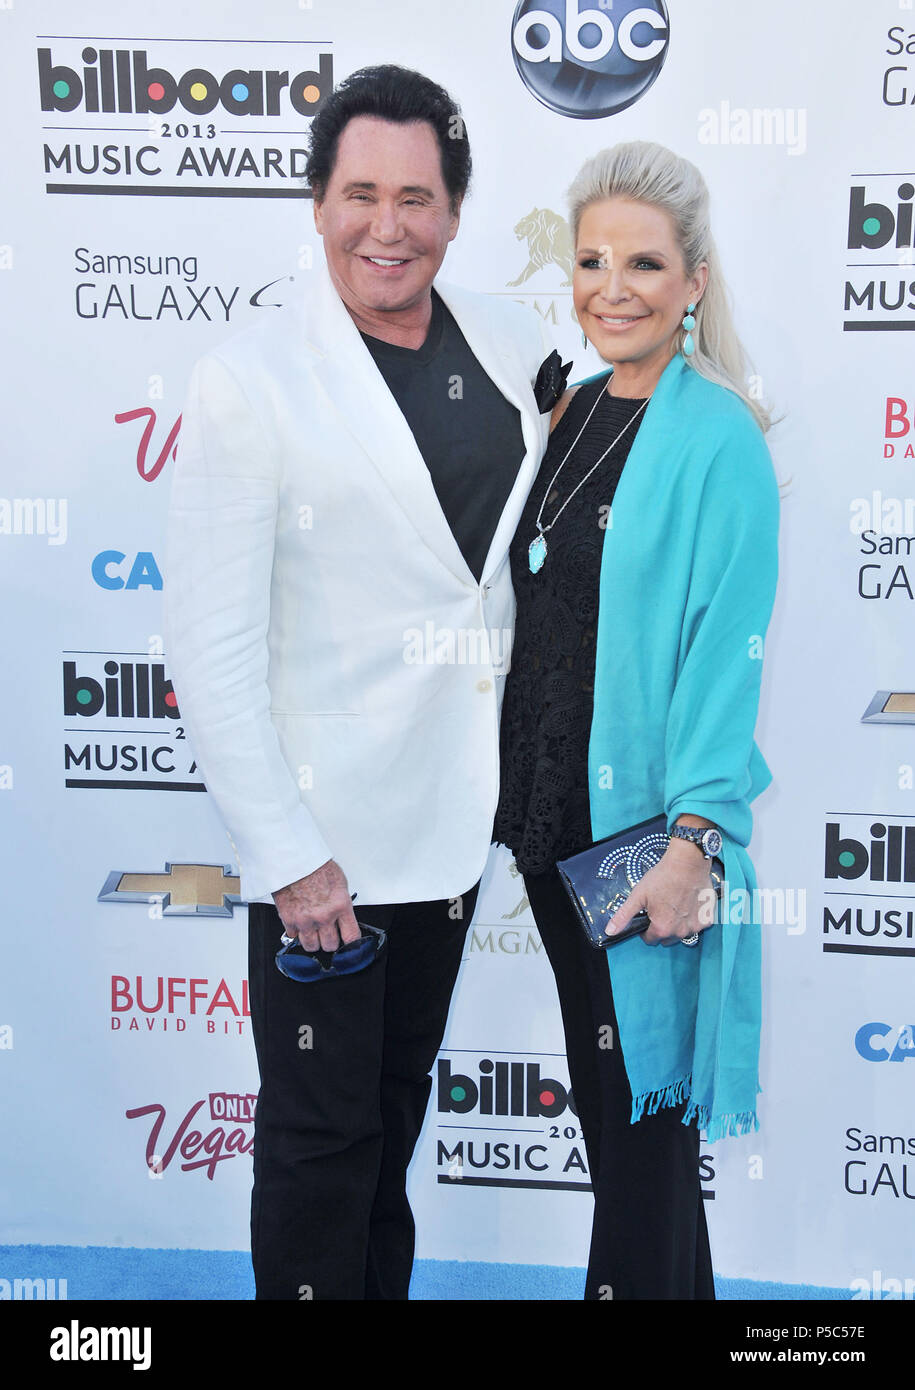 Wayne Newton and wife  at the Billboard Music Aw. 2013 at the MGM Grand In Las Vegas.Wayne Newton and wife  ------------- Red Carpet Event, Vertical, USA, Film Industry, Celebrities,  Photography, Bestof, Arts Culture and Entertainment, Topix Celebrities fashion /  Vertical, Best of, Event in Hollywood Life - California,  Red Carpet and backstage, USA, Film Industry, Celebrities,  movie celebrities, TV celebrities, Music celebrities, Photography, Bestof, Arts Culture and Entertainment,  Topix, vertical,  family from from the year , 2013, inquiry tsuni@Gamma-USA.com Husband and wife Stock Photo